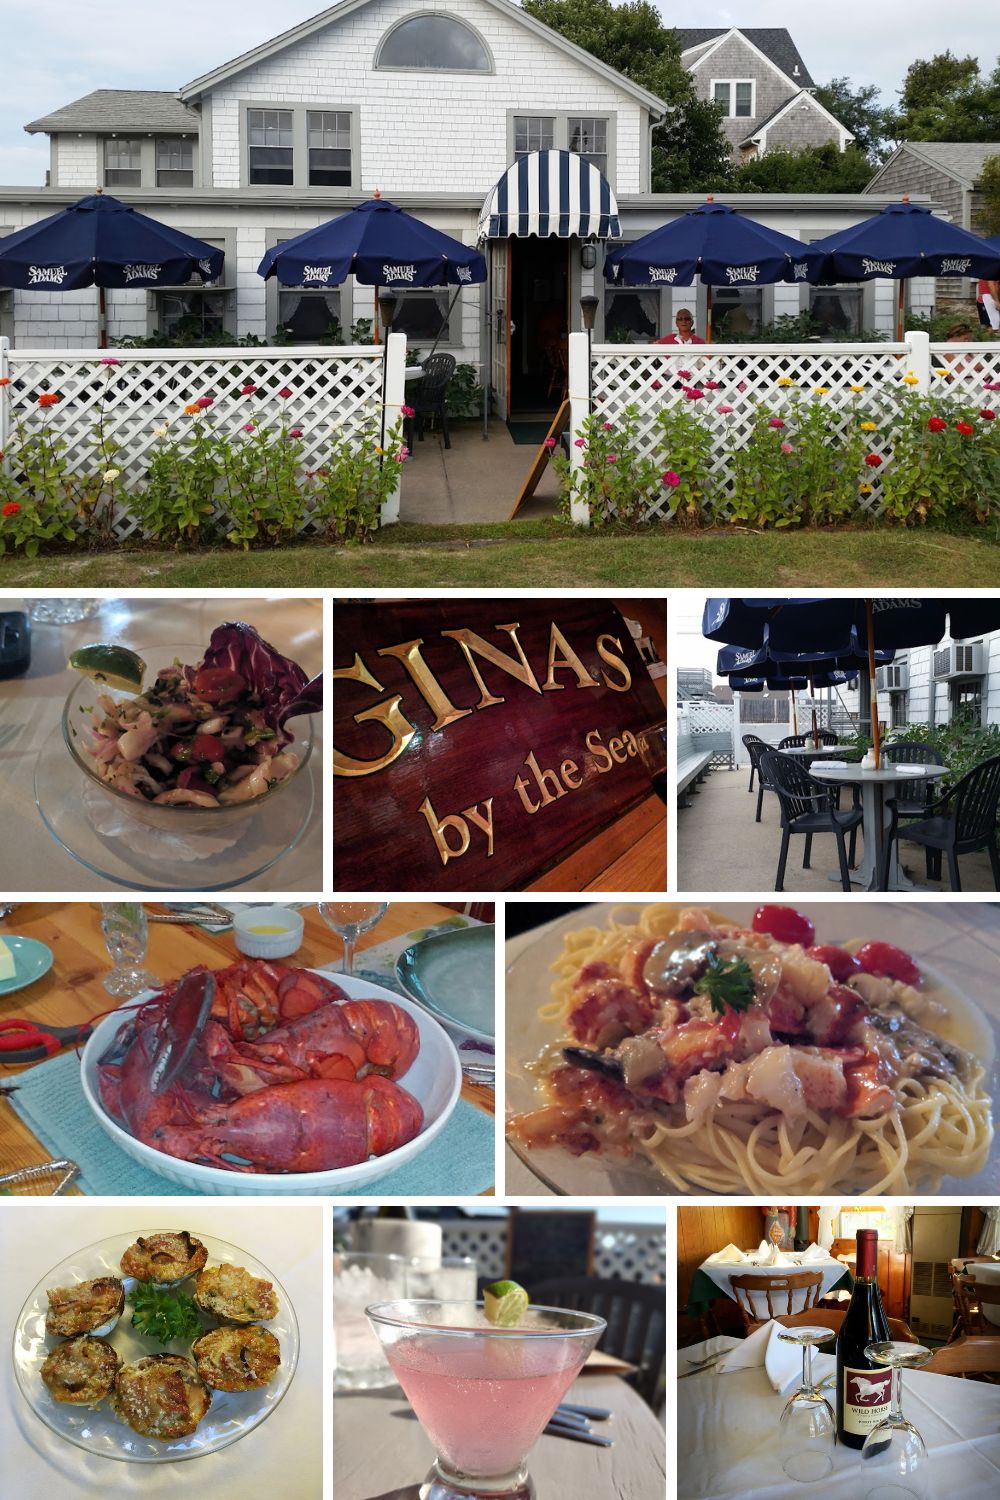 Gina’s by the Sea